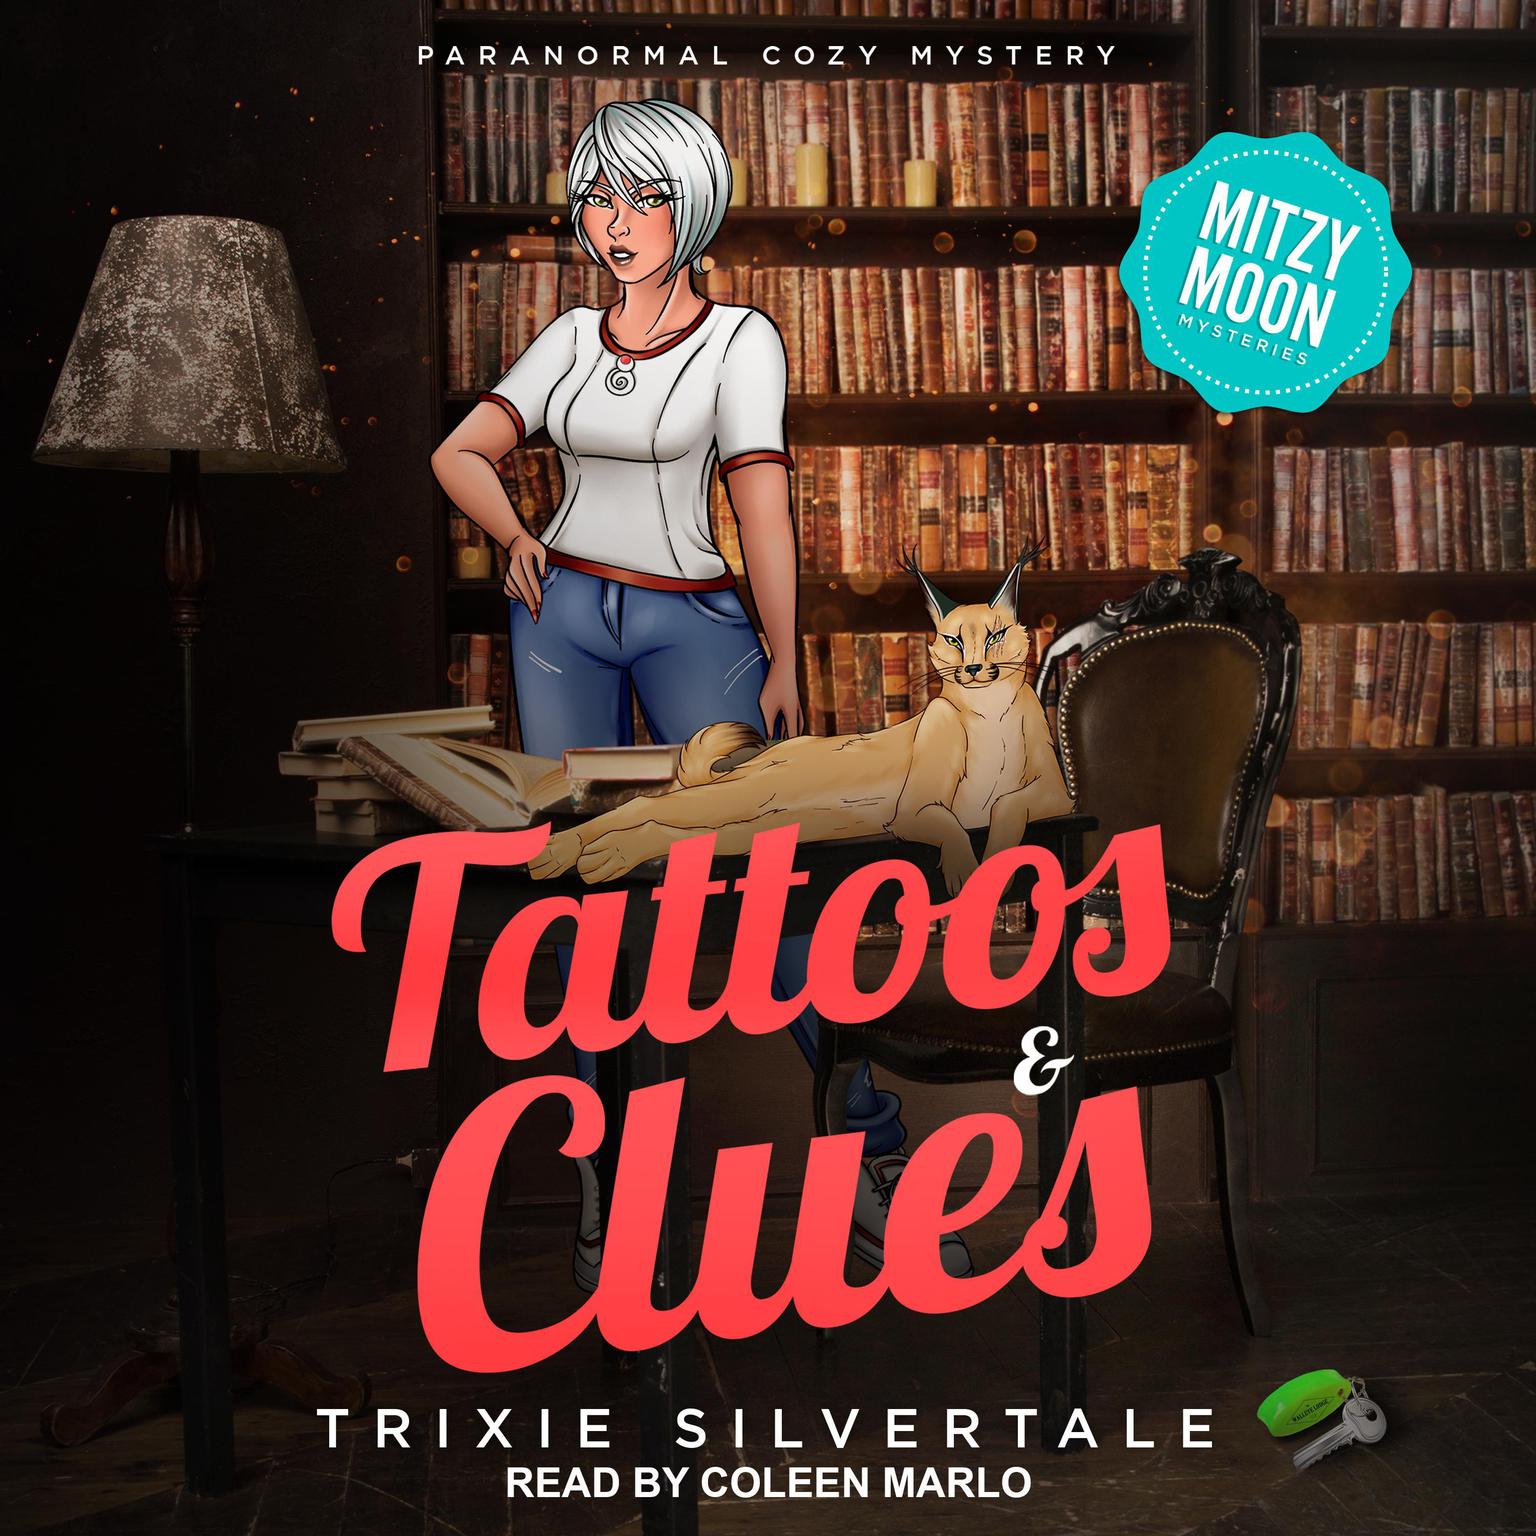 Tattoos & Clues: Paranormal Cozy Mystery Audiobook, by Trixie Silvertale